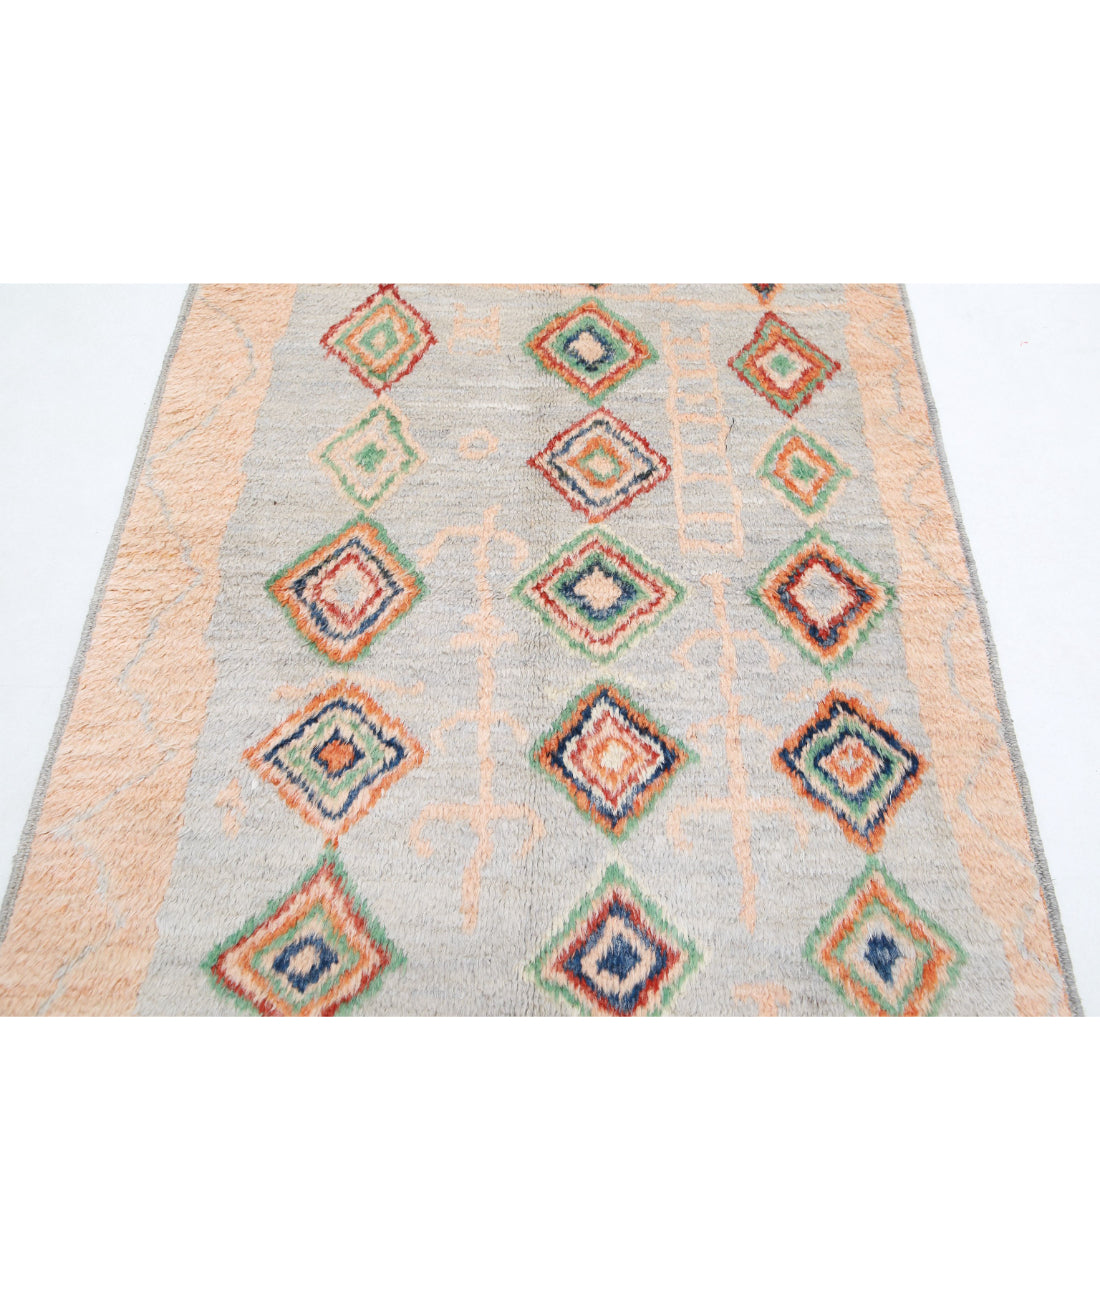 Hand Knotted Tribal Moroccan Wool Rug - 4'2'' x 5'9'' 4'2'' x 5'9'' (125 X 173) / Blue / Brown